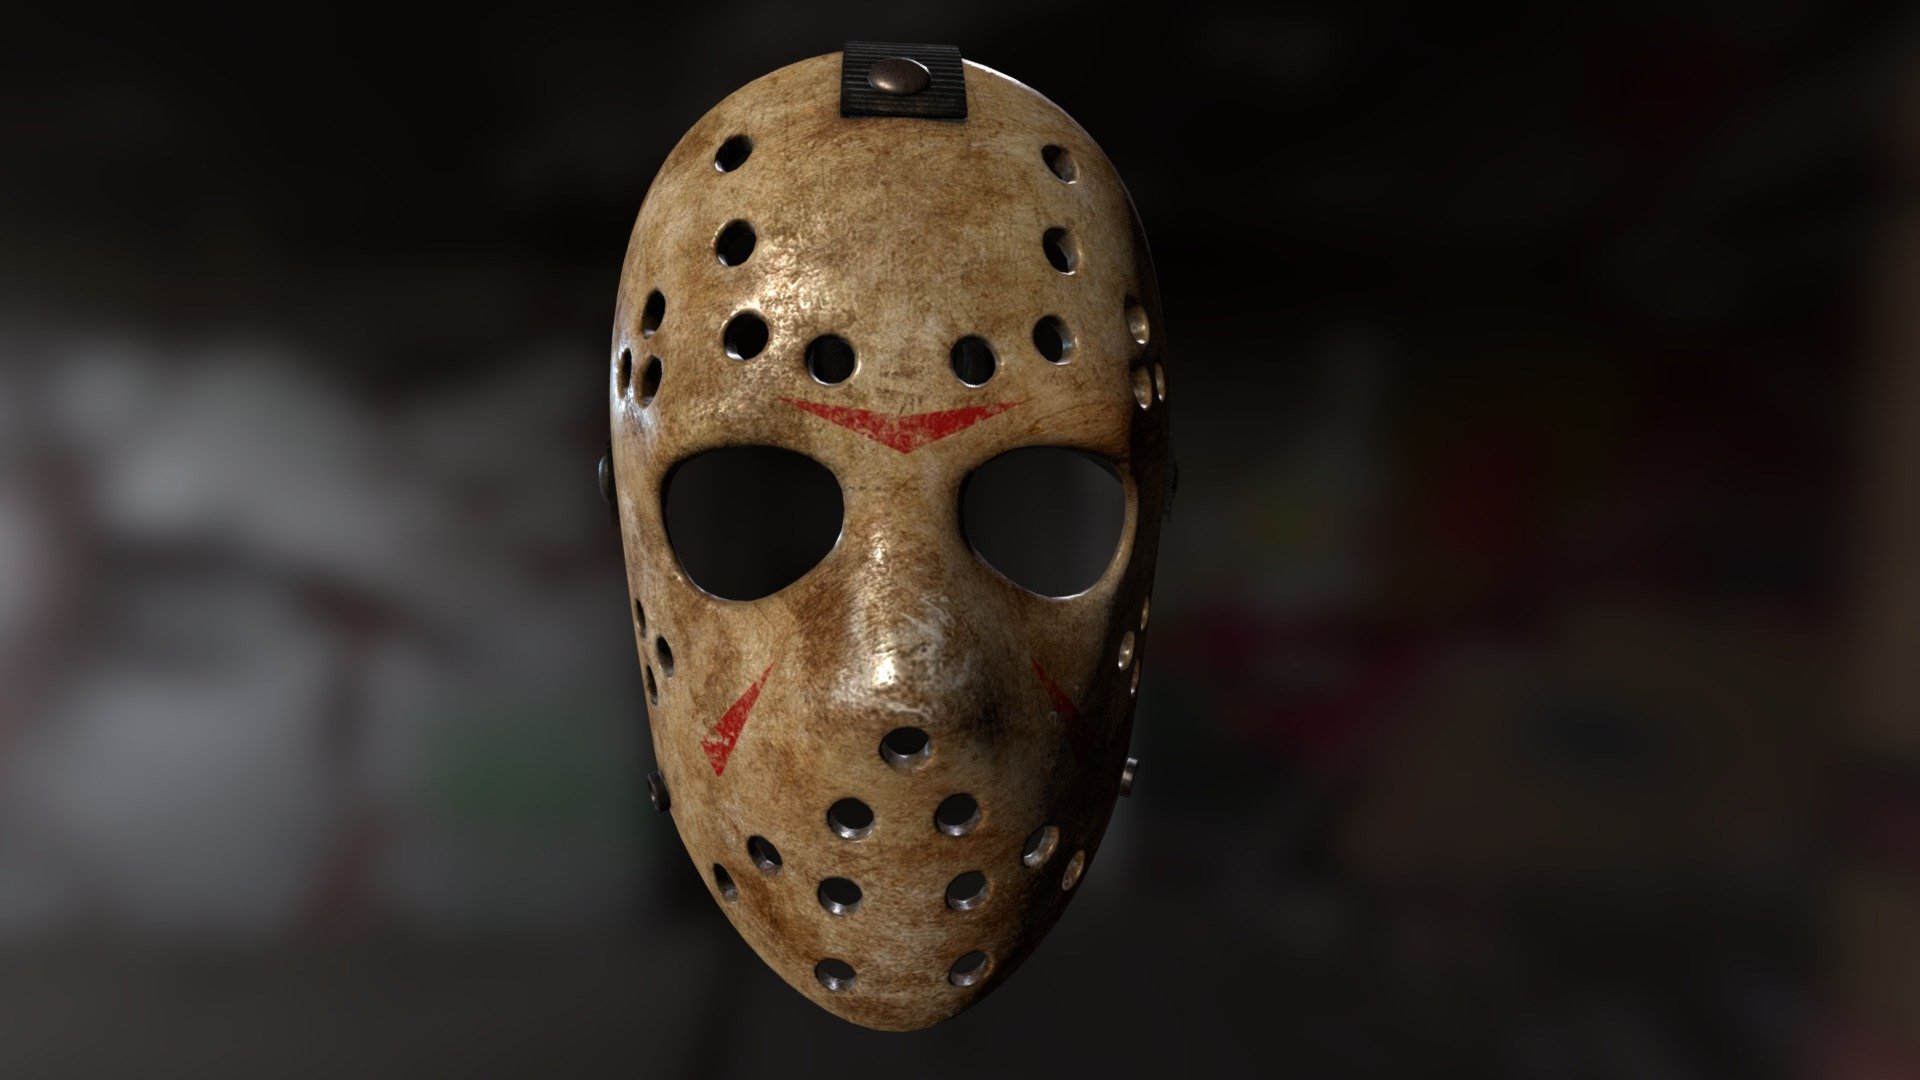 Jason's hockey mask from the movie Friday the 13th.

Model &amp; Bake: Corvalho

Textures &amp; Shaders: Rafaël De Jongh - Friday the 13th hockey mask - 3D model by rafaeldejongh 3d model